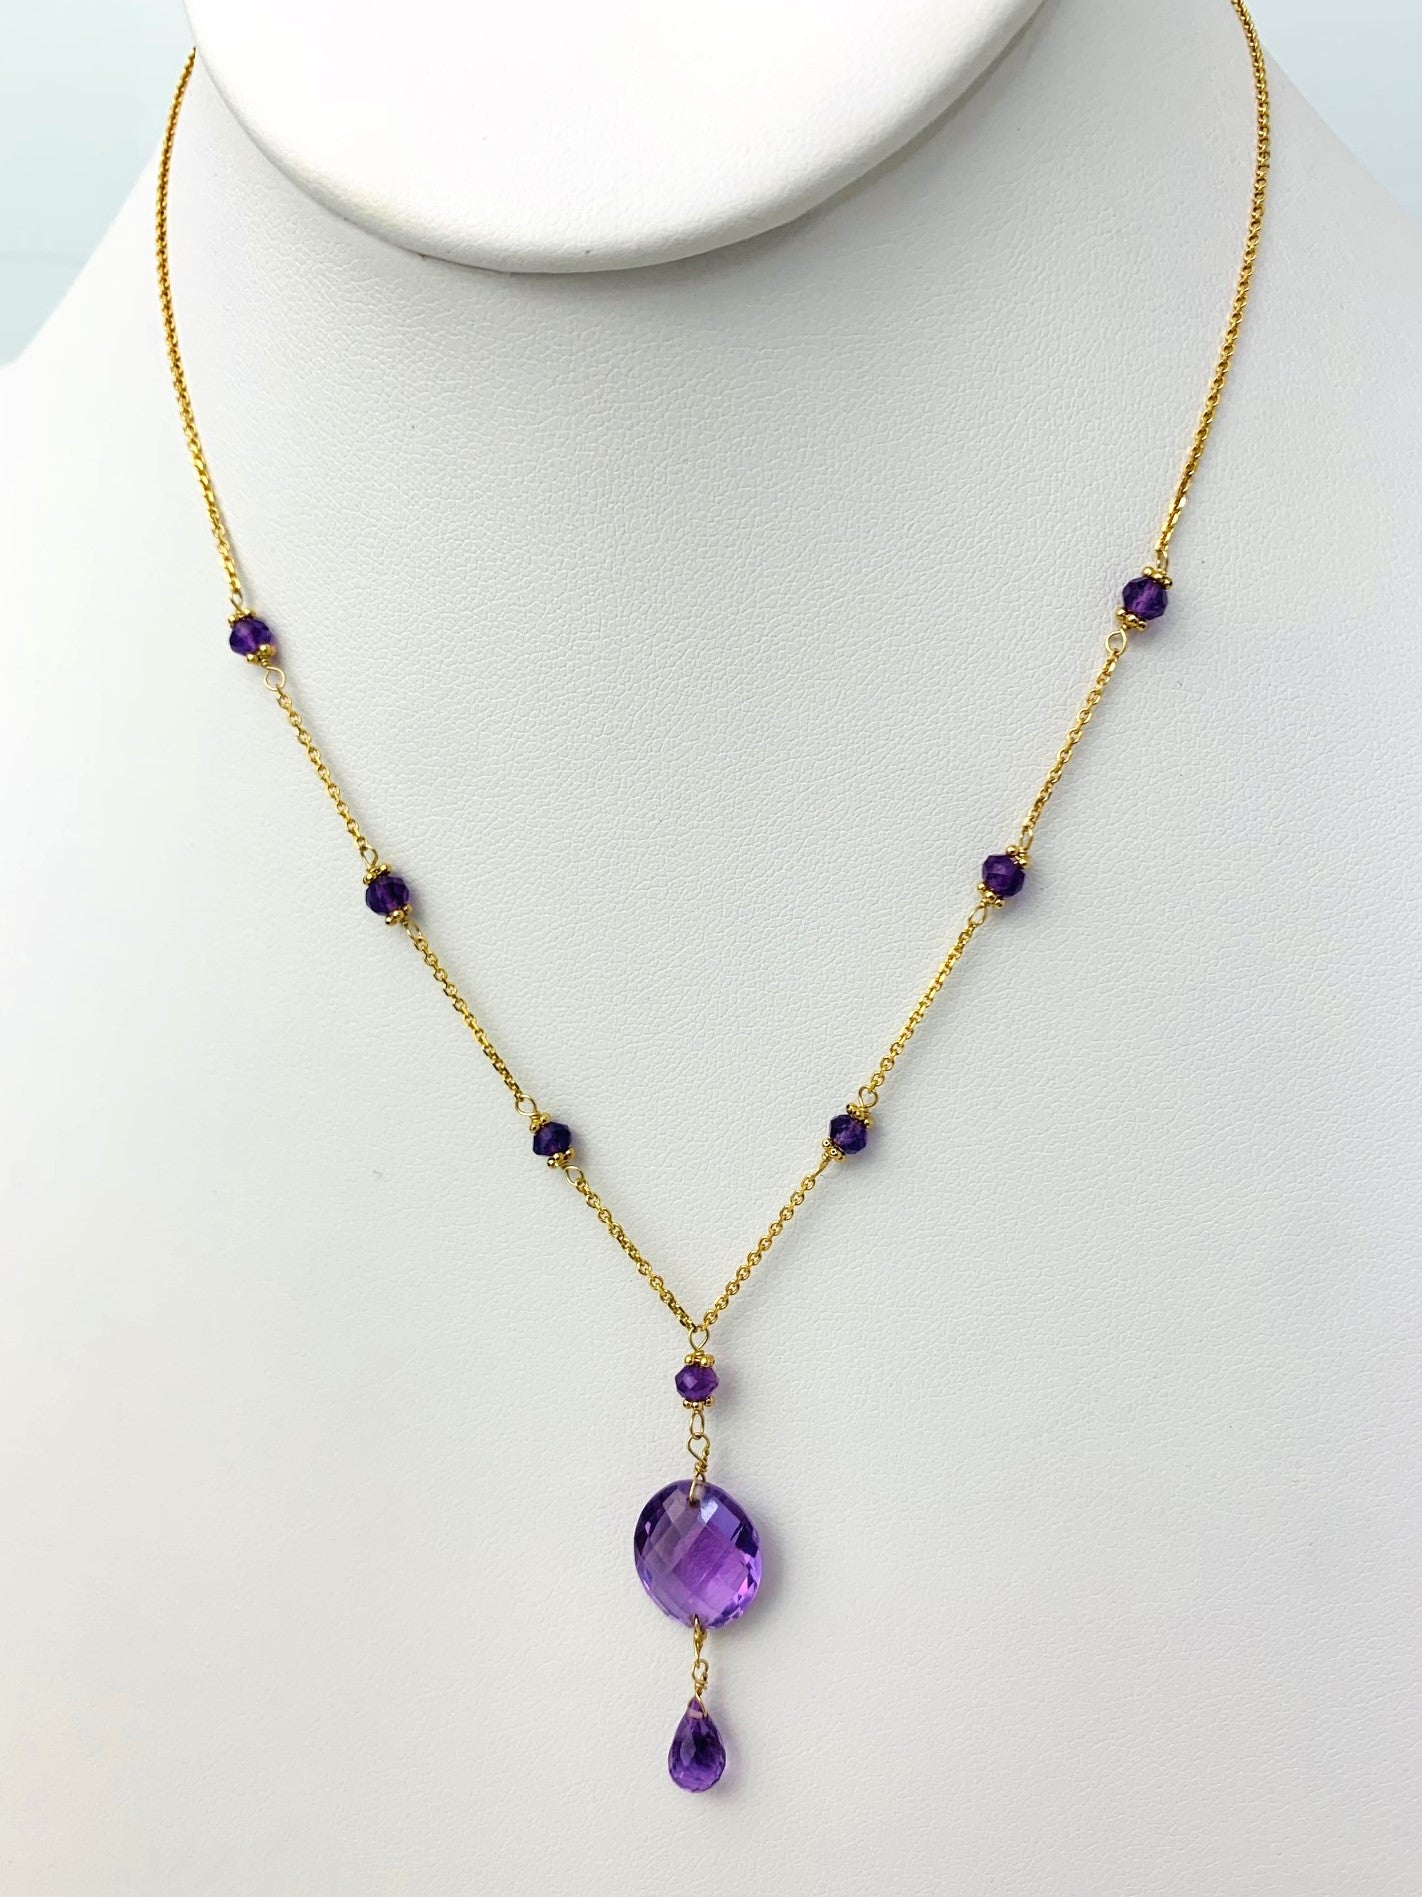 16-17" Amethyst Station Necklace With Oval Checkerboard And Briolette Lariat Drop in 14KY - NCK-350-TNCDRPGM14Y-AM-17